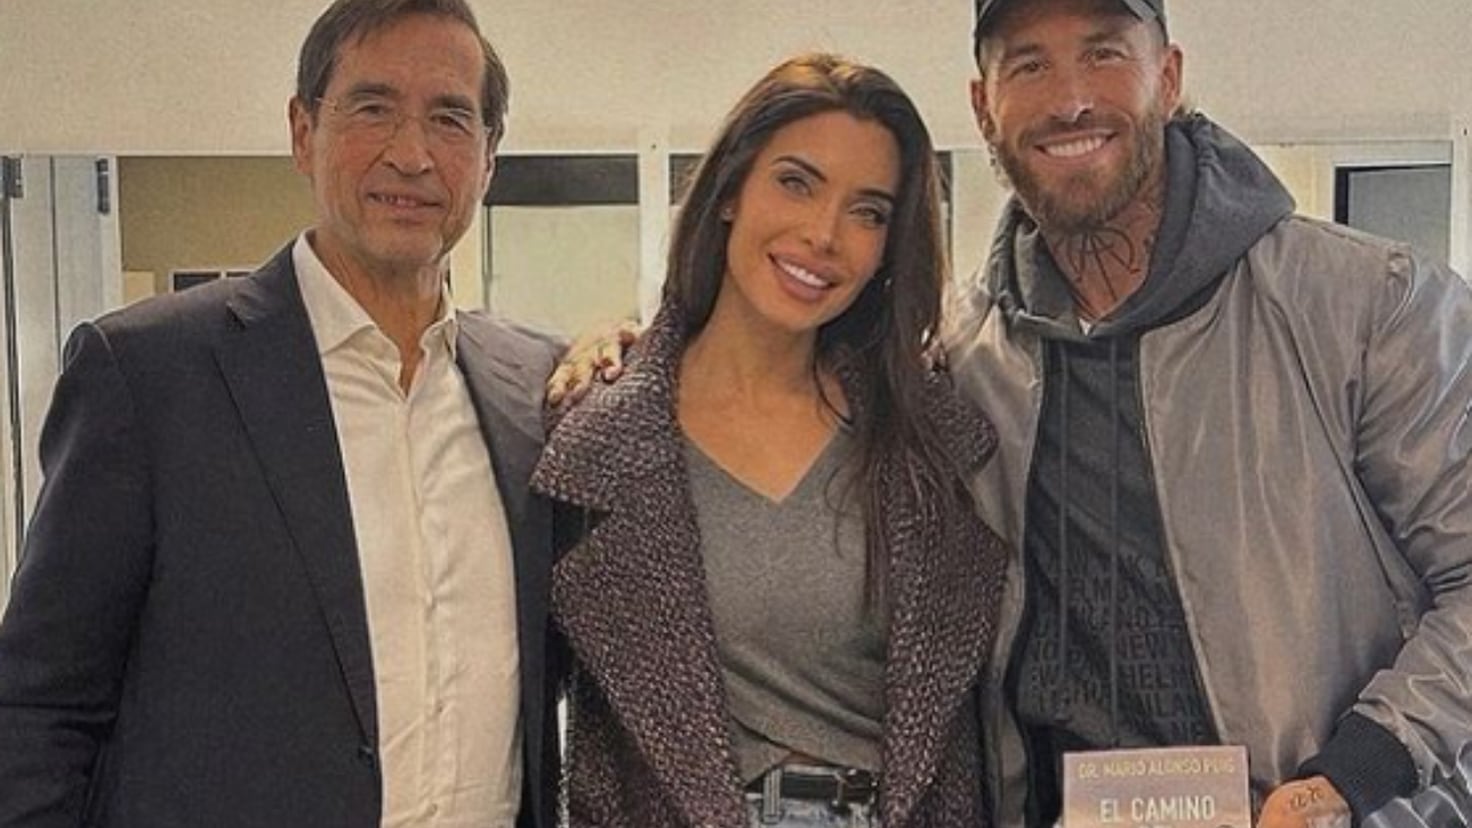 The image that shows the reconciliation of Ramos and Pilar Rubio
